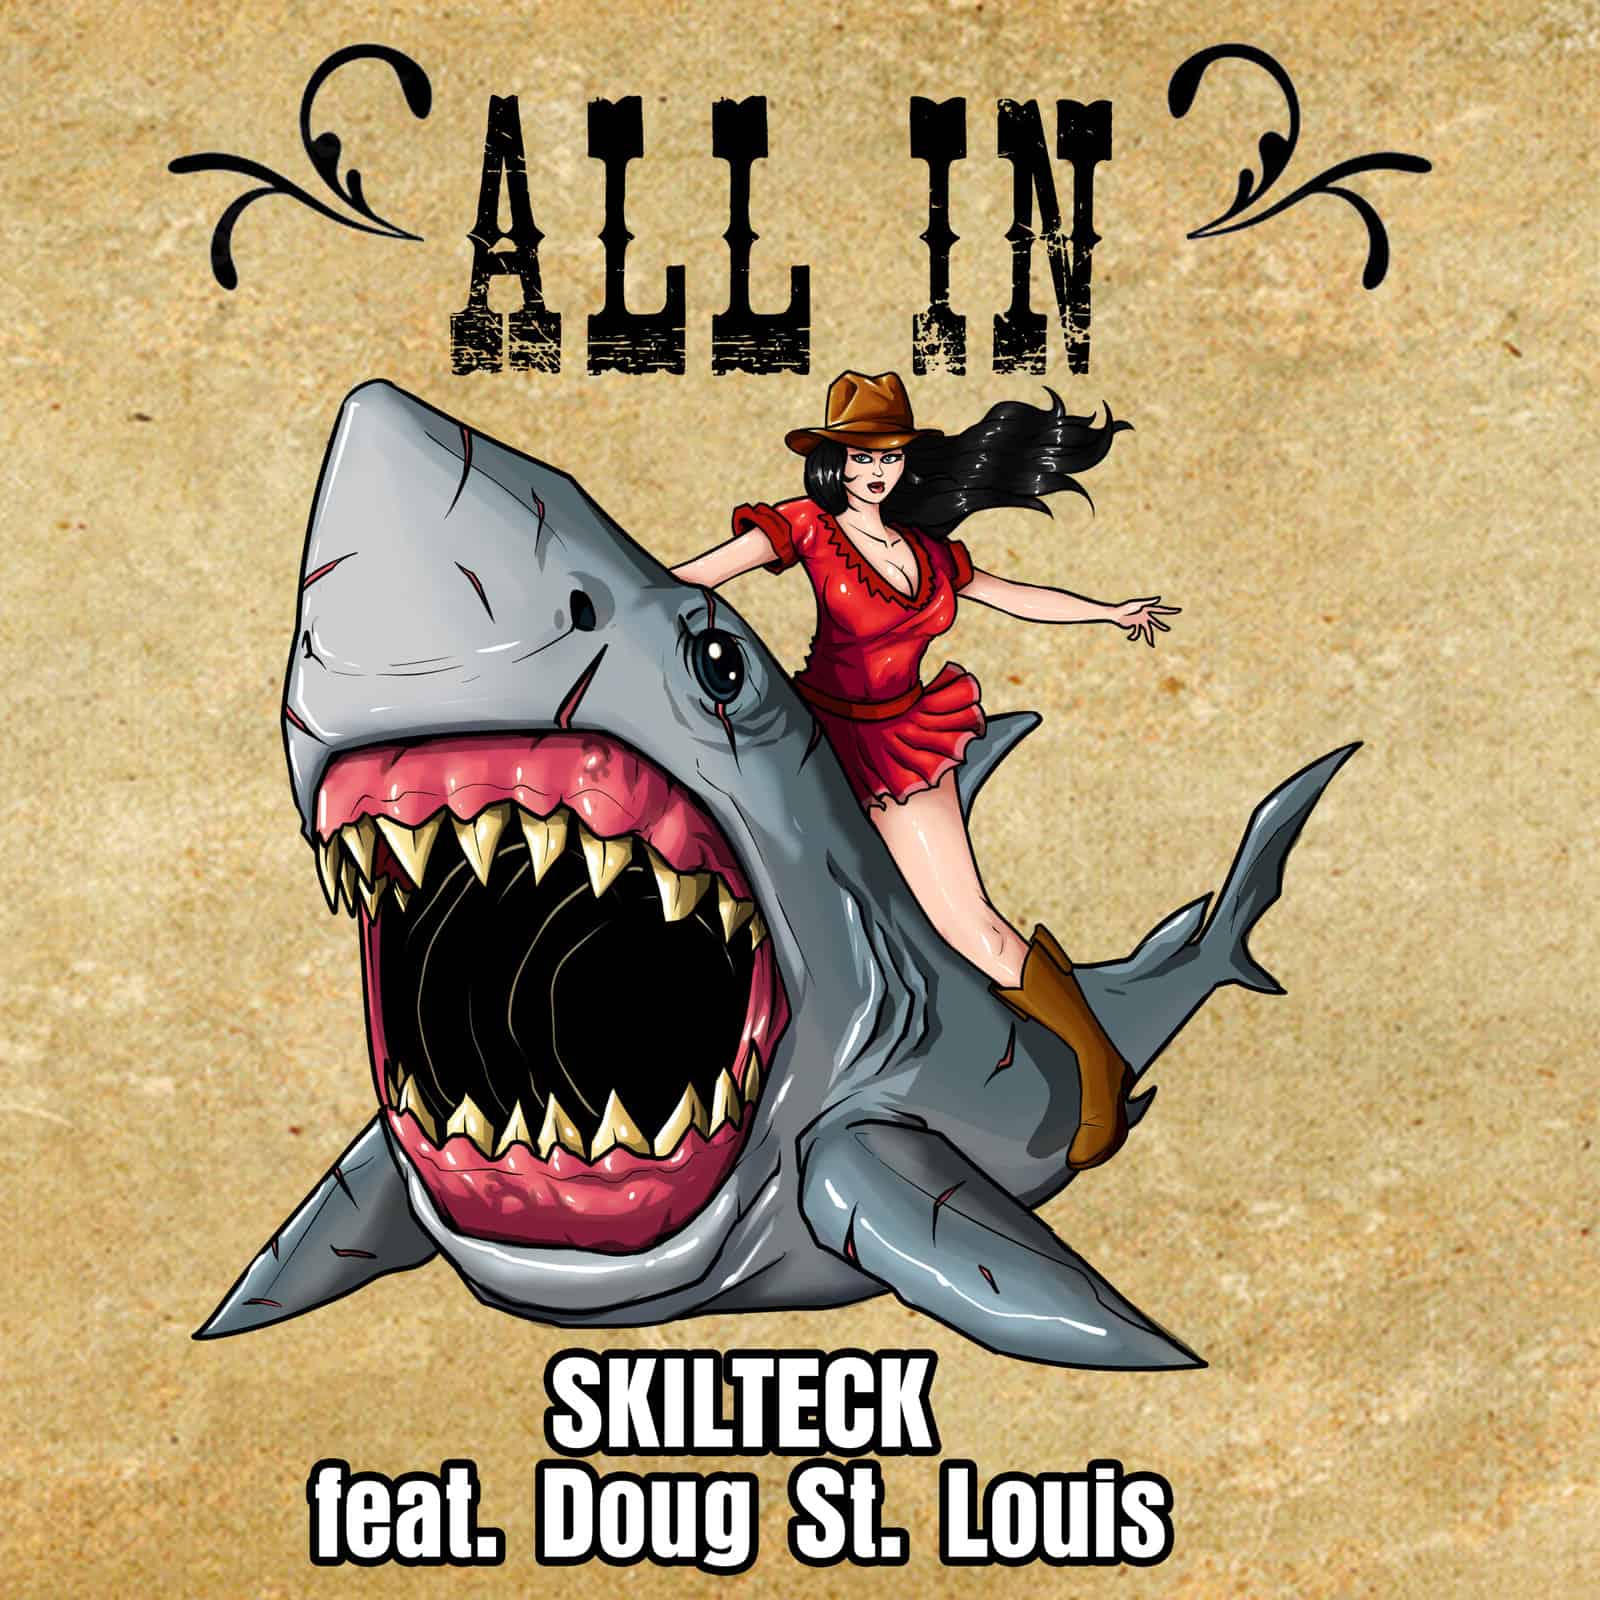 Skilteck- All In ft Doug St-Louis